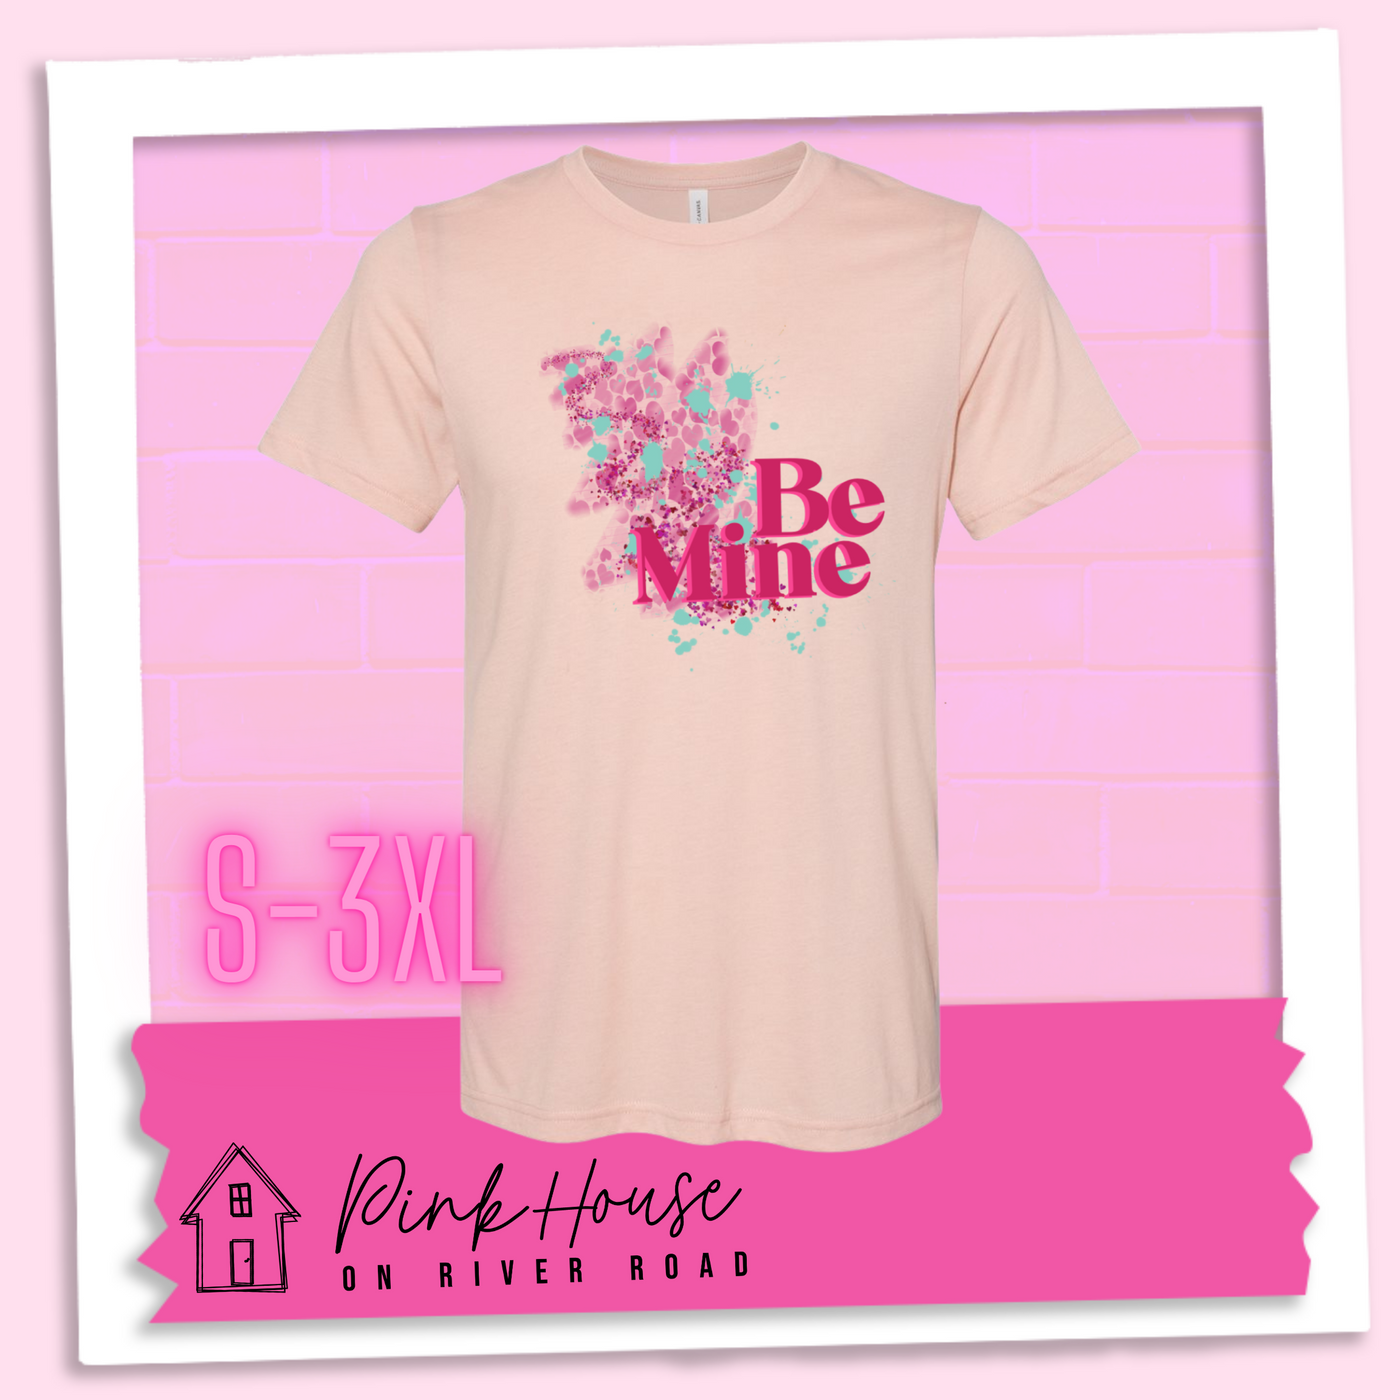 Heather Peach Tee with a squiggle design made of pink hearts and pink sparkles with light teal splatters and pink text at the end of the art that says Be Mine with a hot pink shadow.